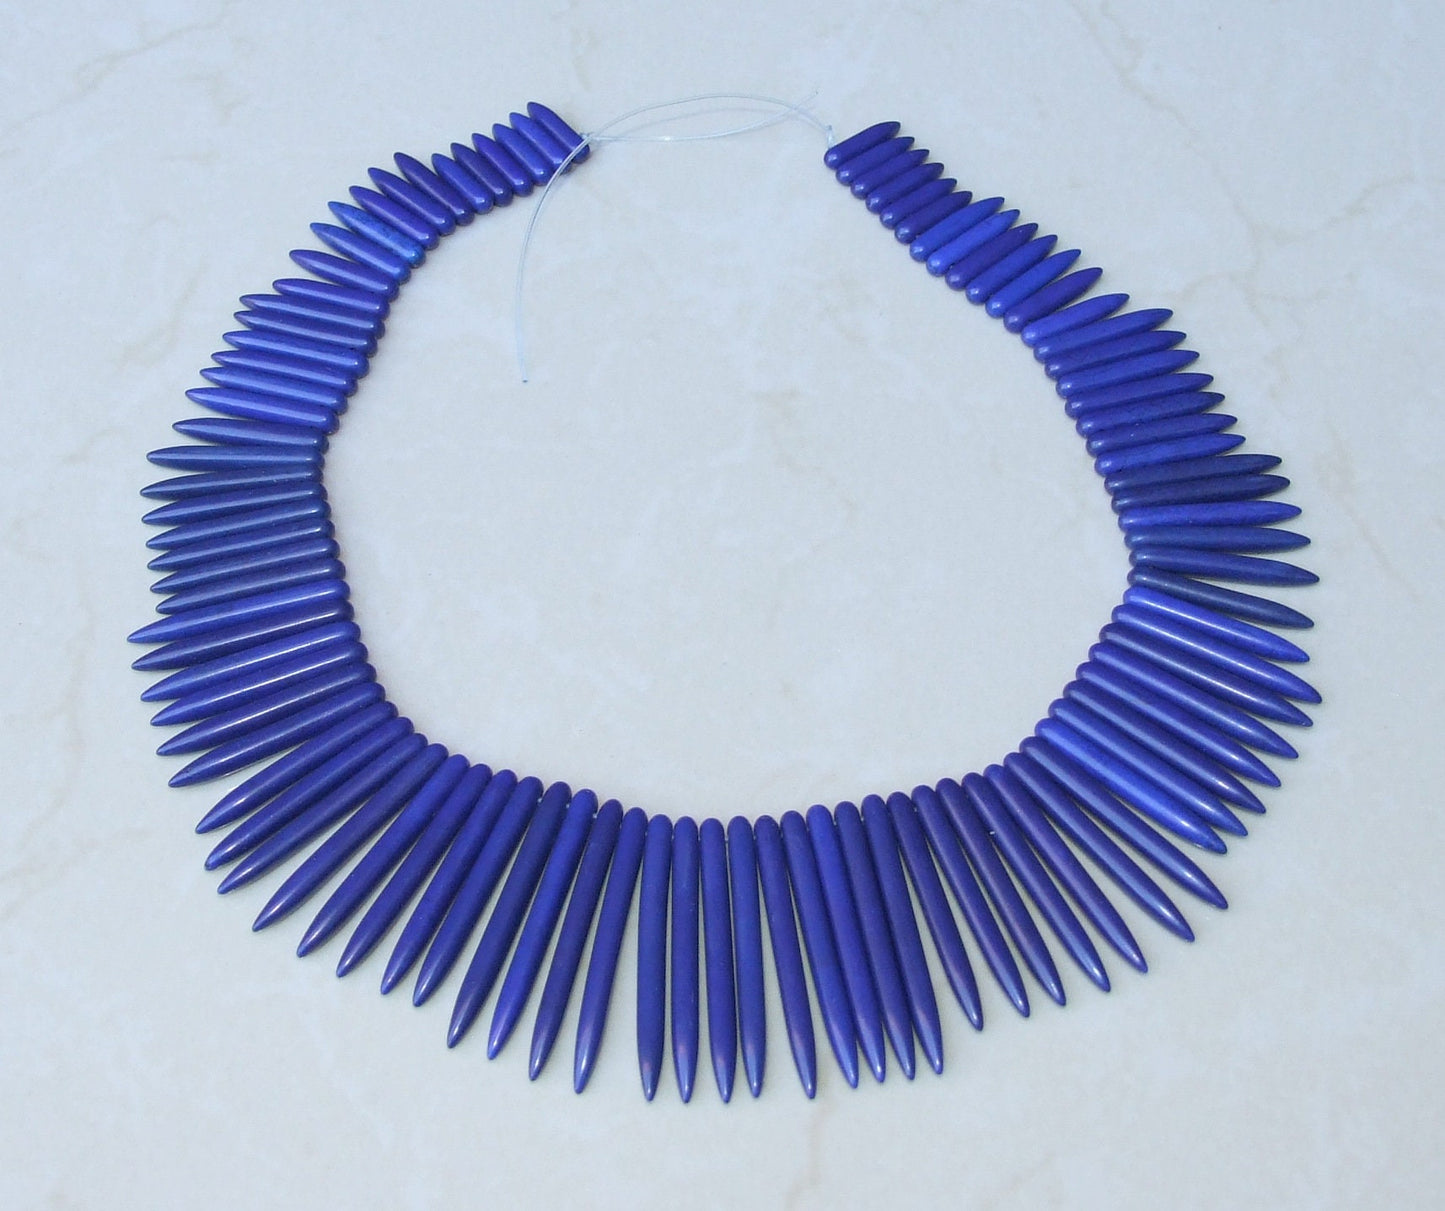 Lapis Blue Turquoise, Spike Beads, Spike Collar, Spike Choker Necklace, Turquoise Spike Necklace, Statement Necklace, Bib Necklace, 50mm